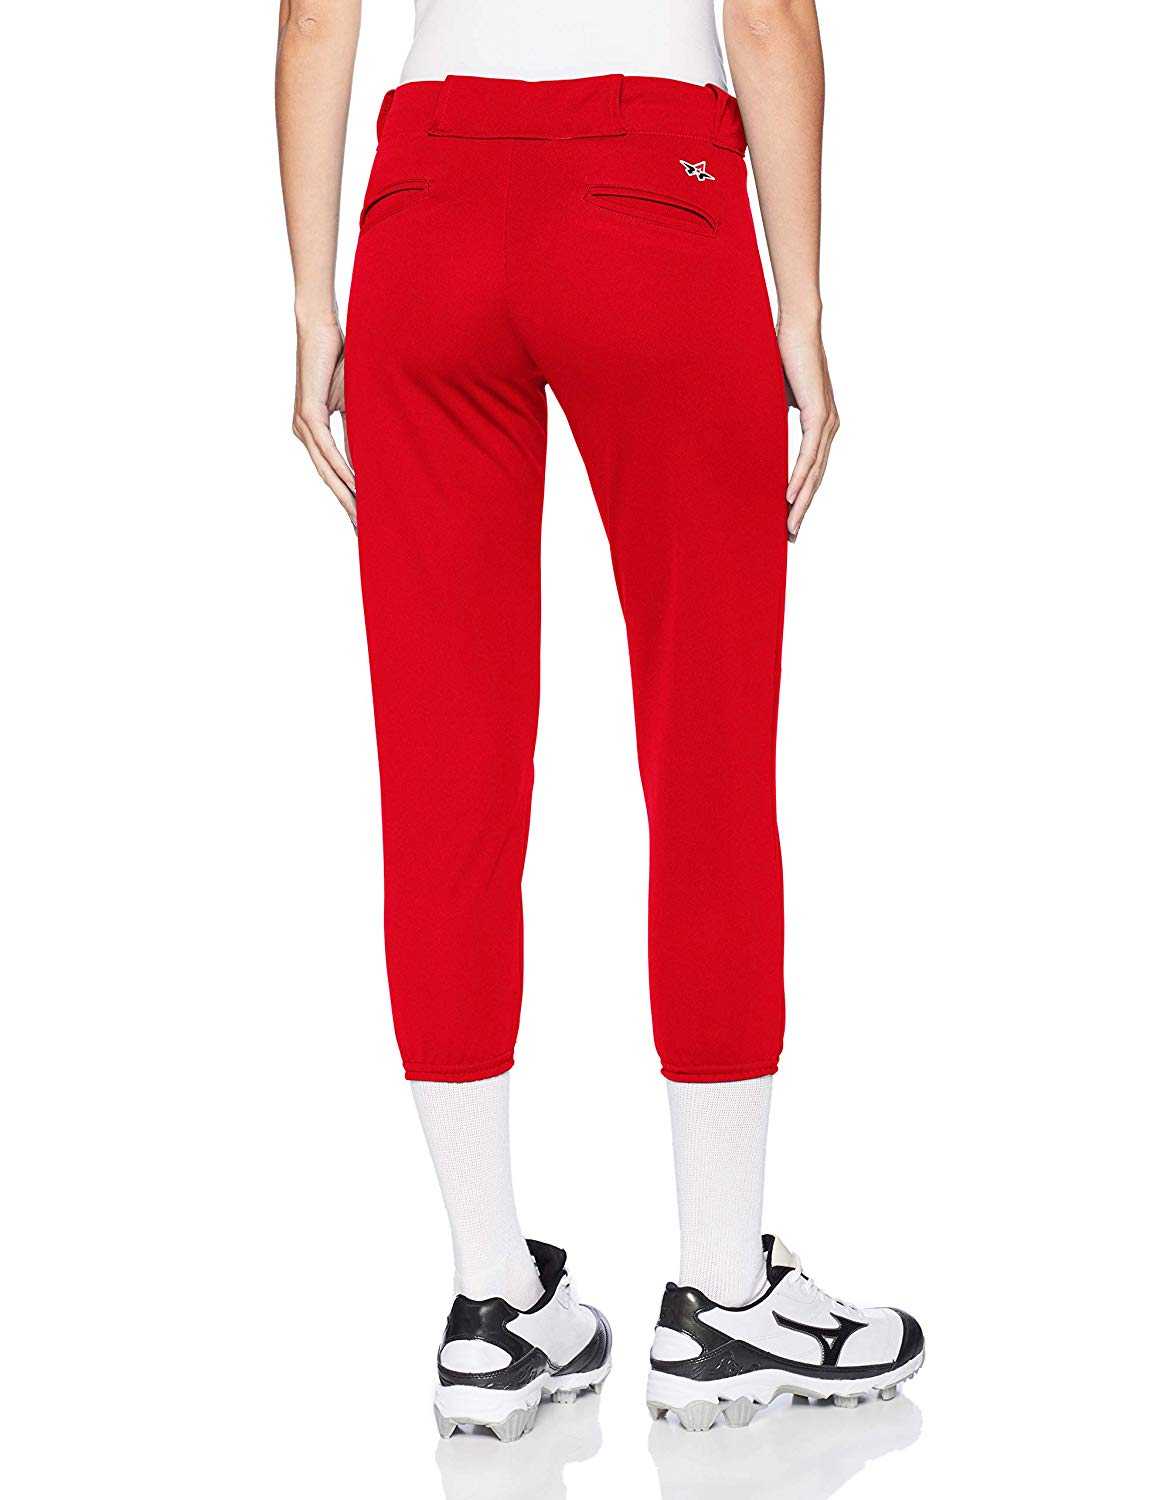 Alleson Athletic 605PBW Women's Fastpitch Pant - Scarlet